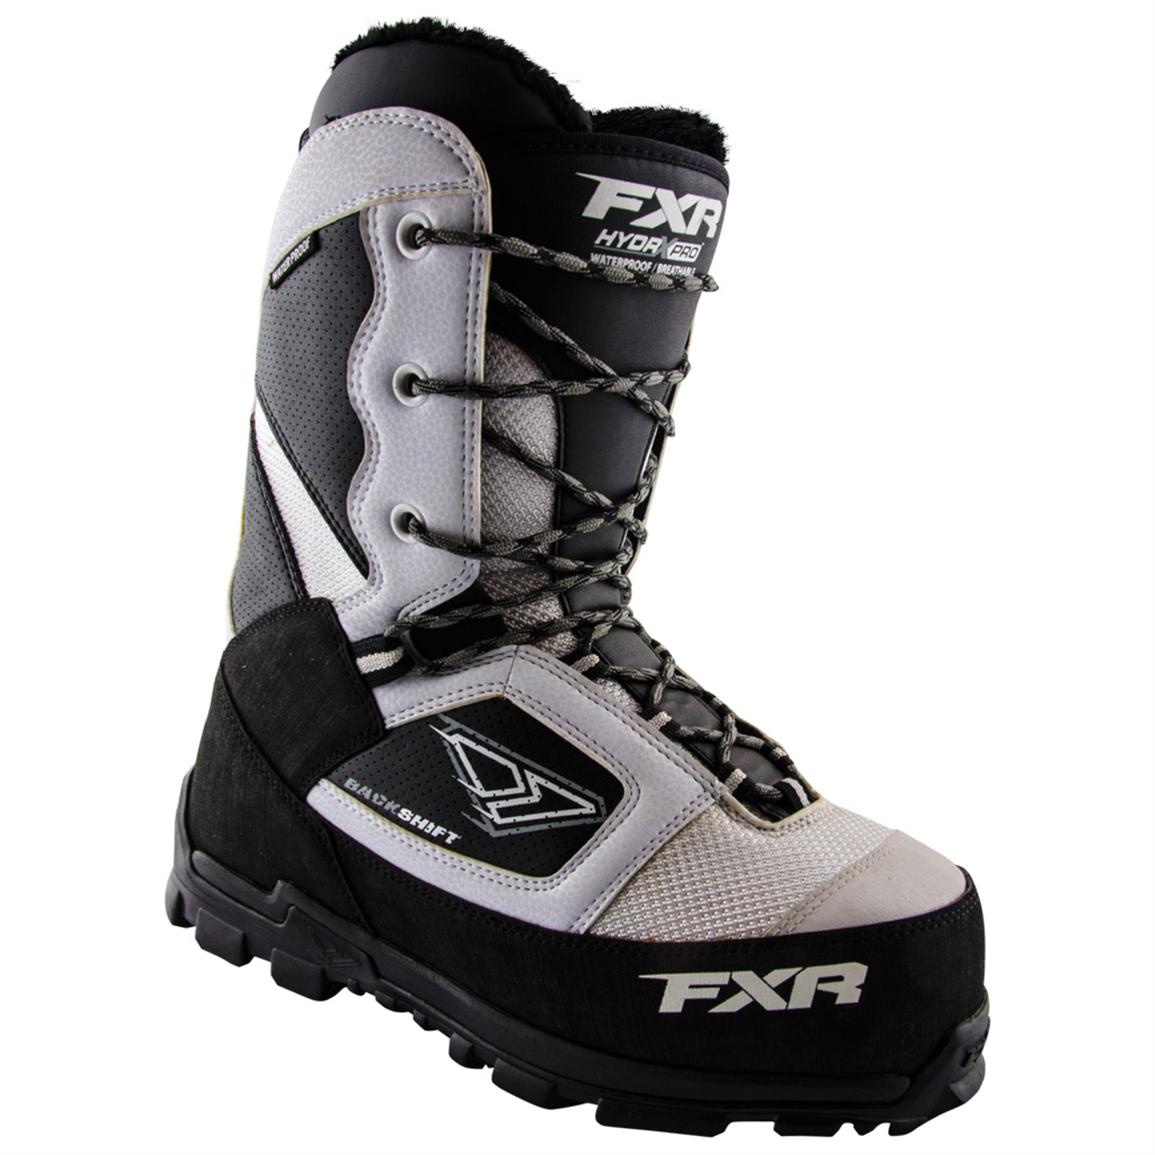 Shop Different Styles of Snowmobile Boots